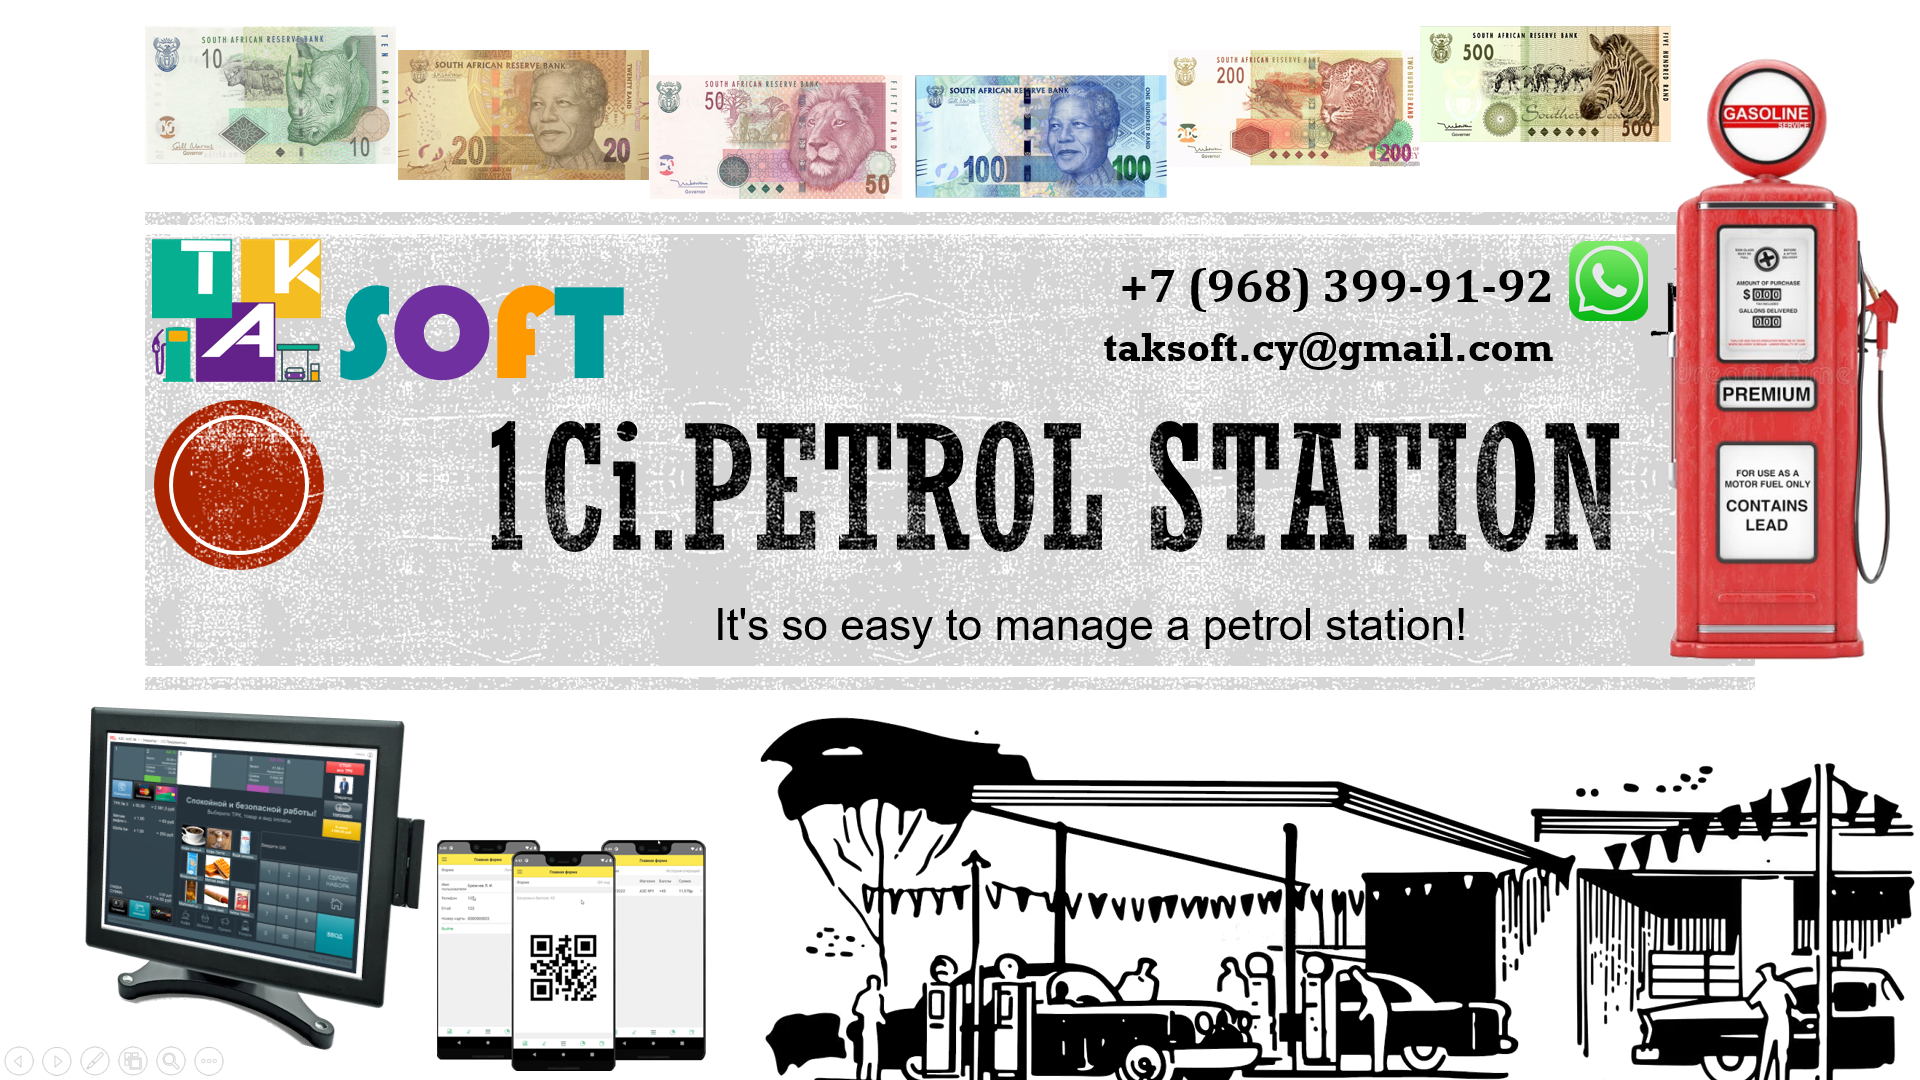 1Ci_Petrol station powered TAK-Soft - incredible automation of gas stations